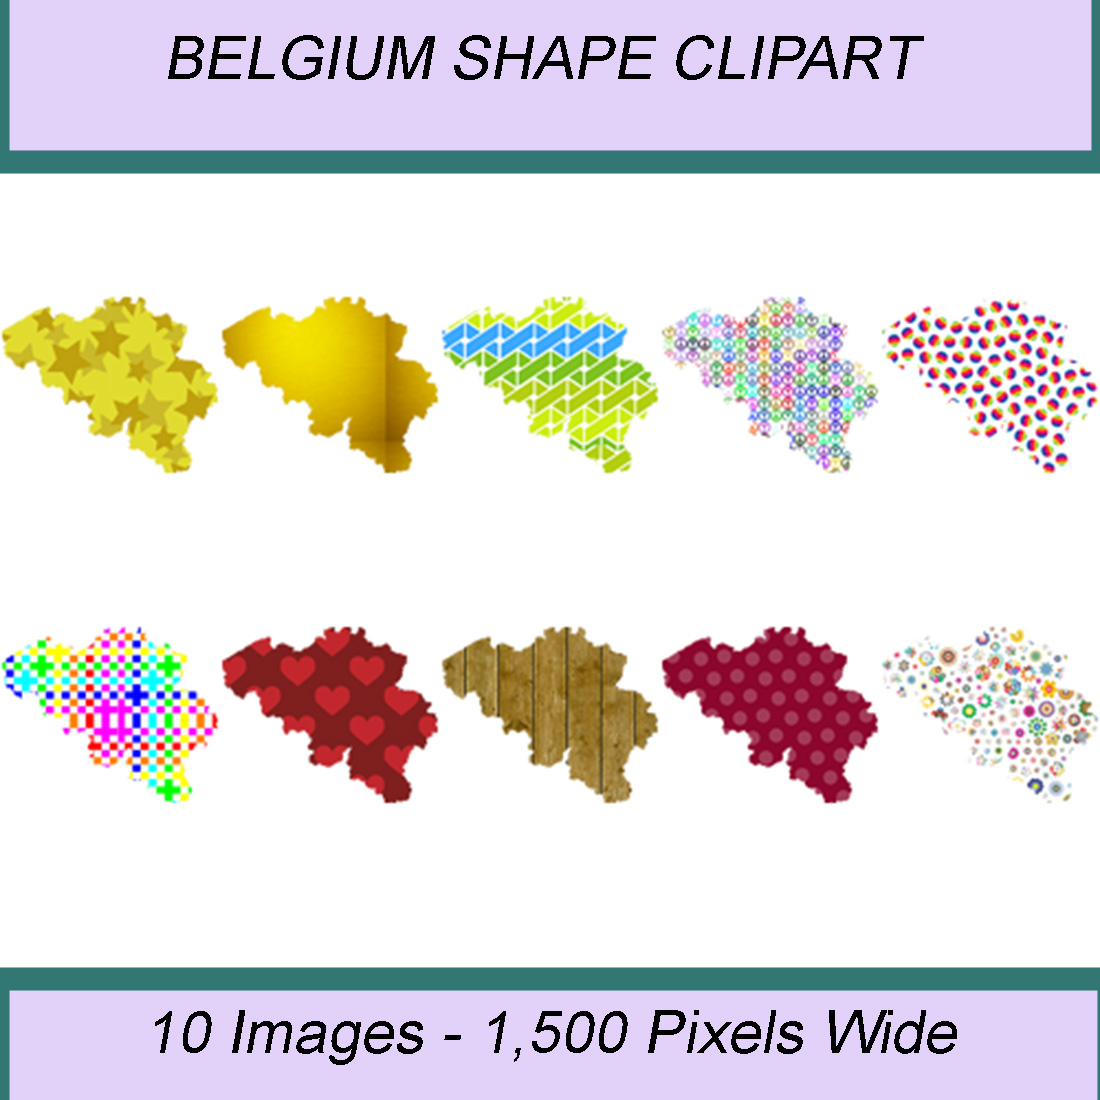 BELGIUM SHAPE CLIPART ICONS cover image.